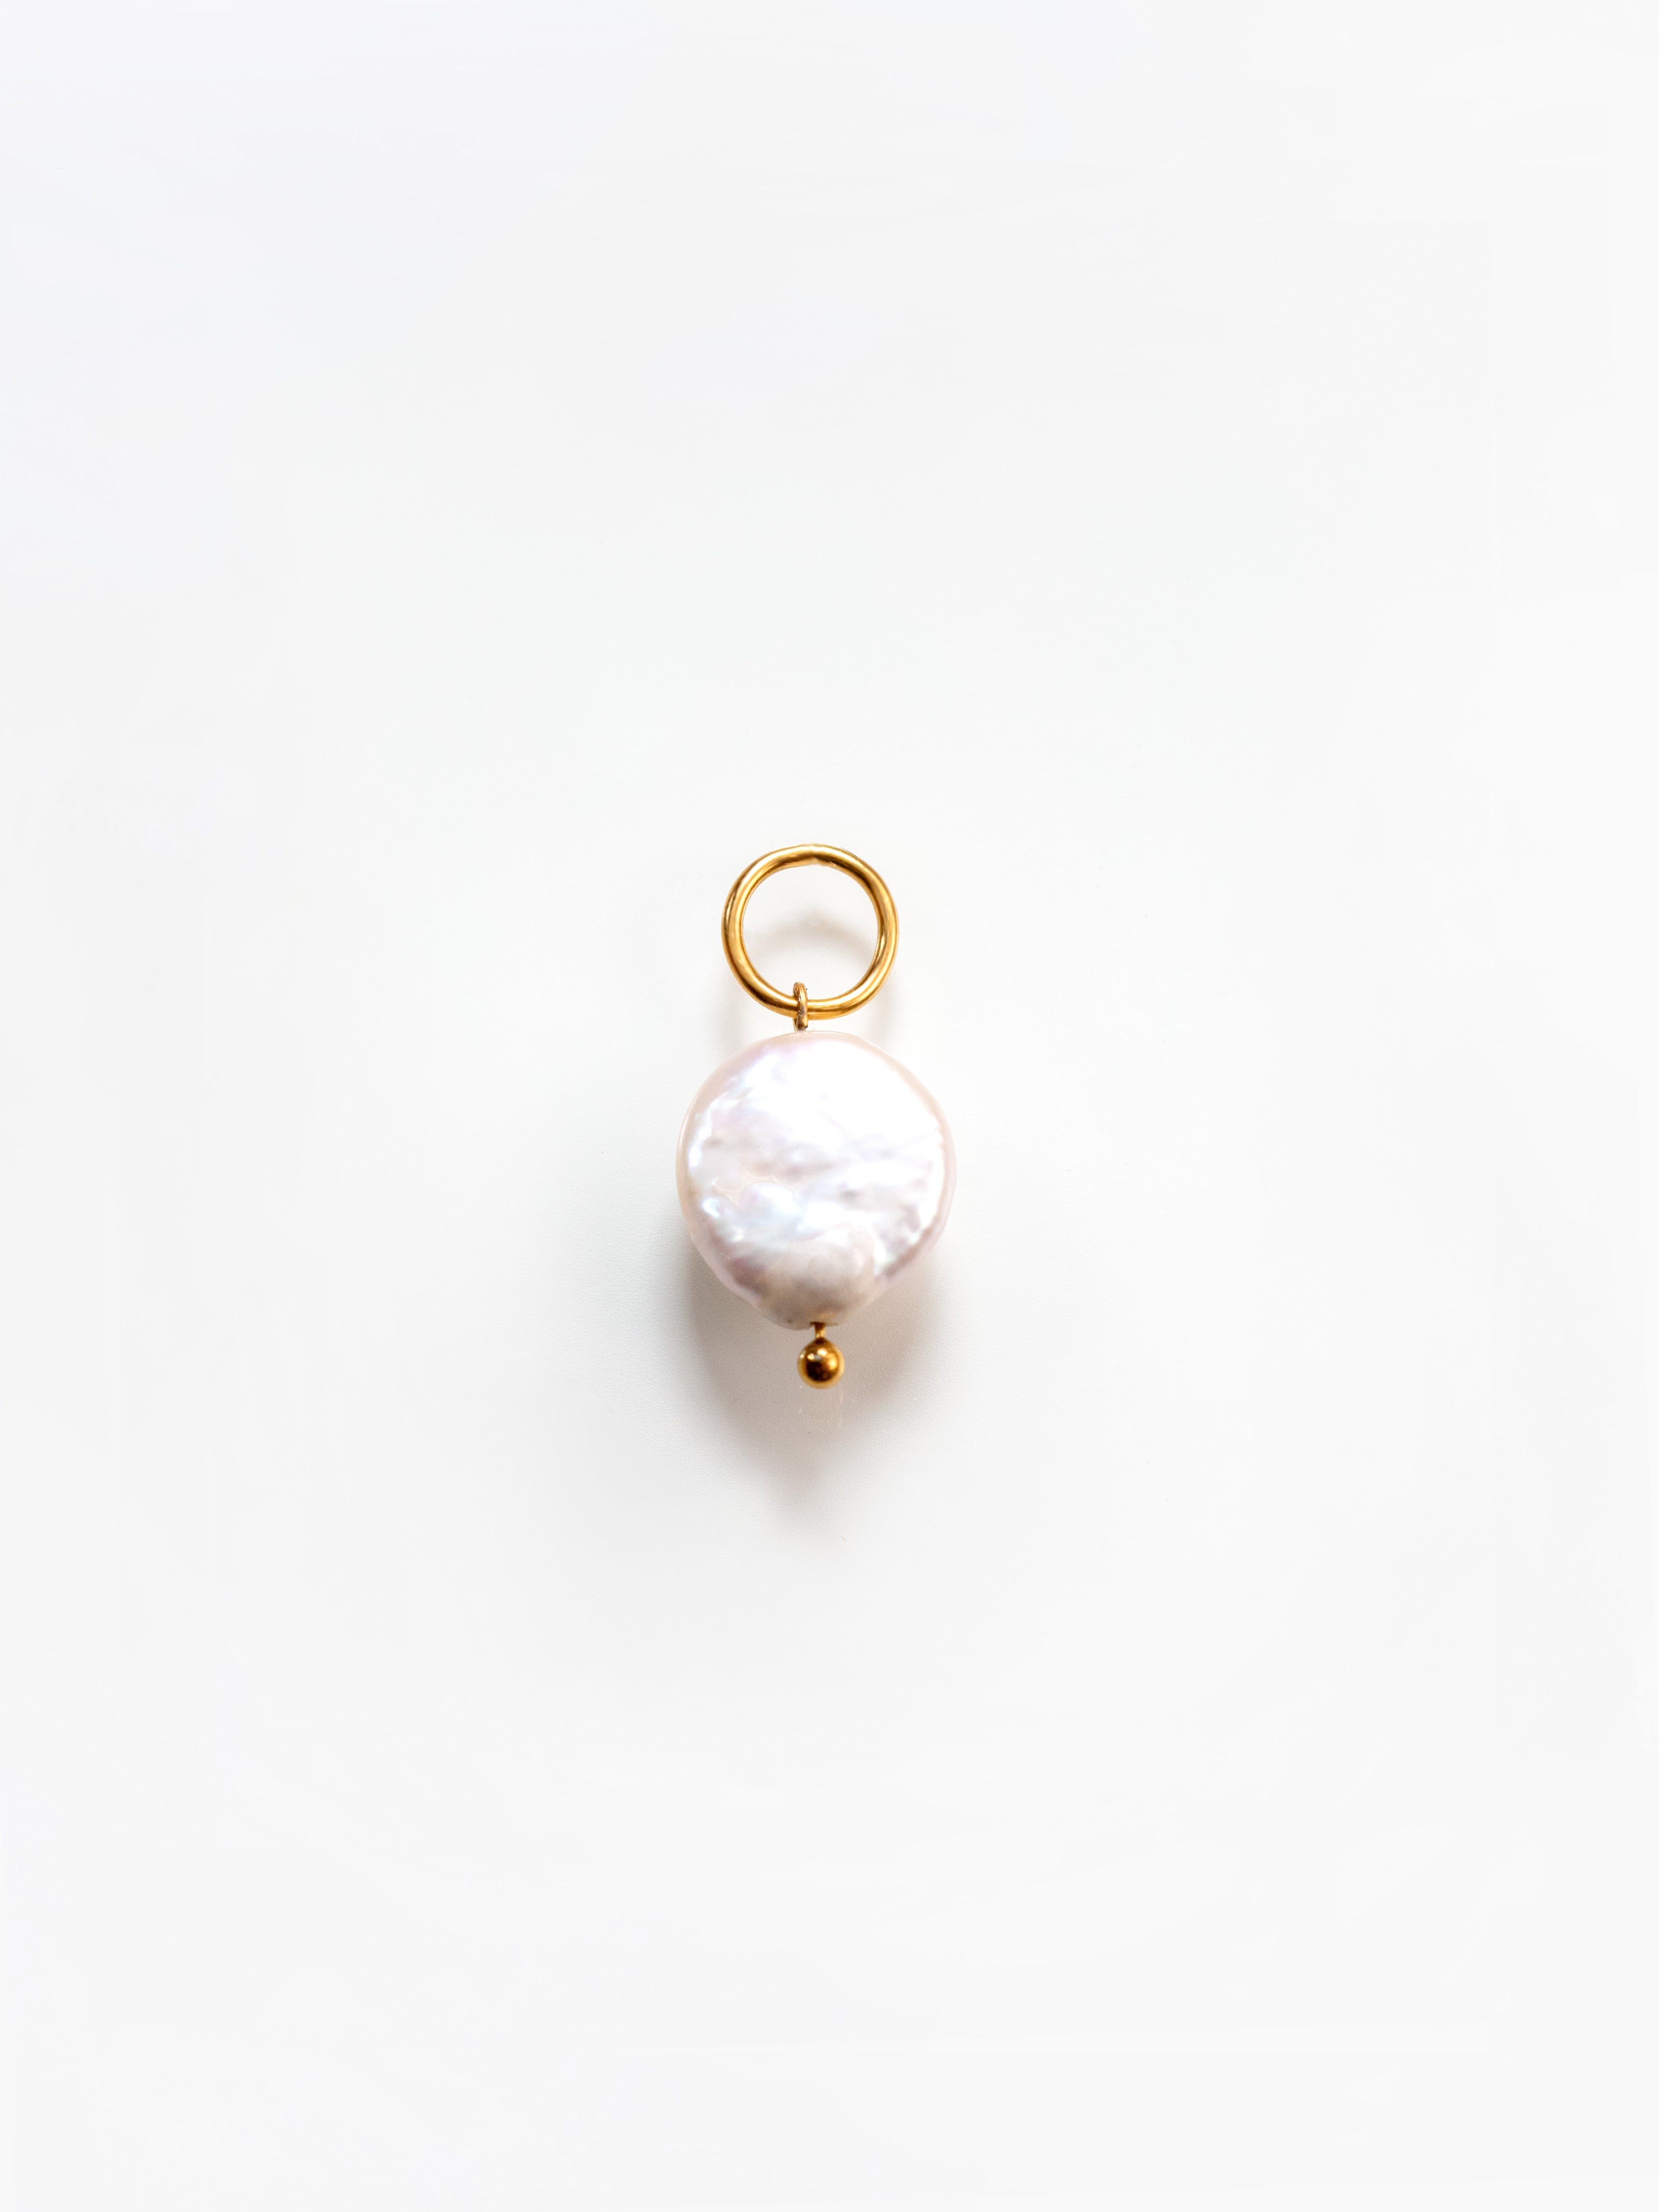 Gold Round Pendant / Charm With White Baroque Pearl